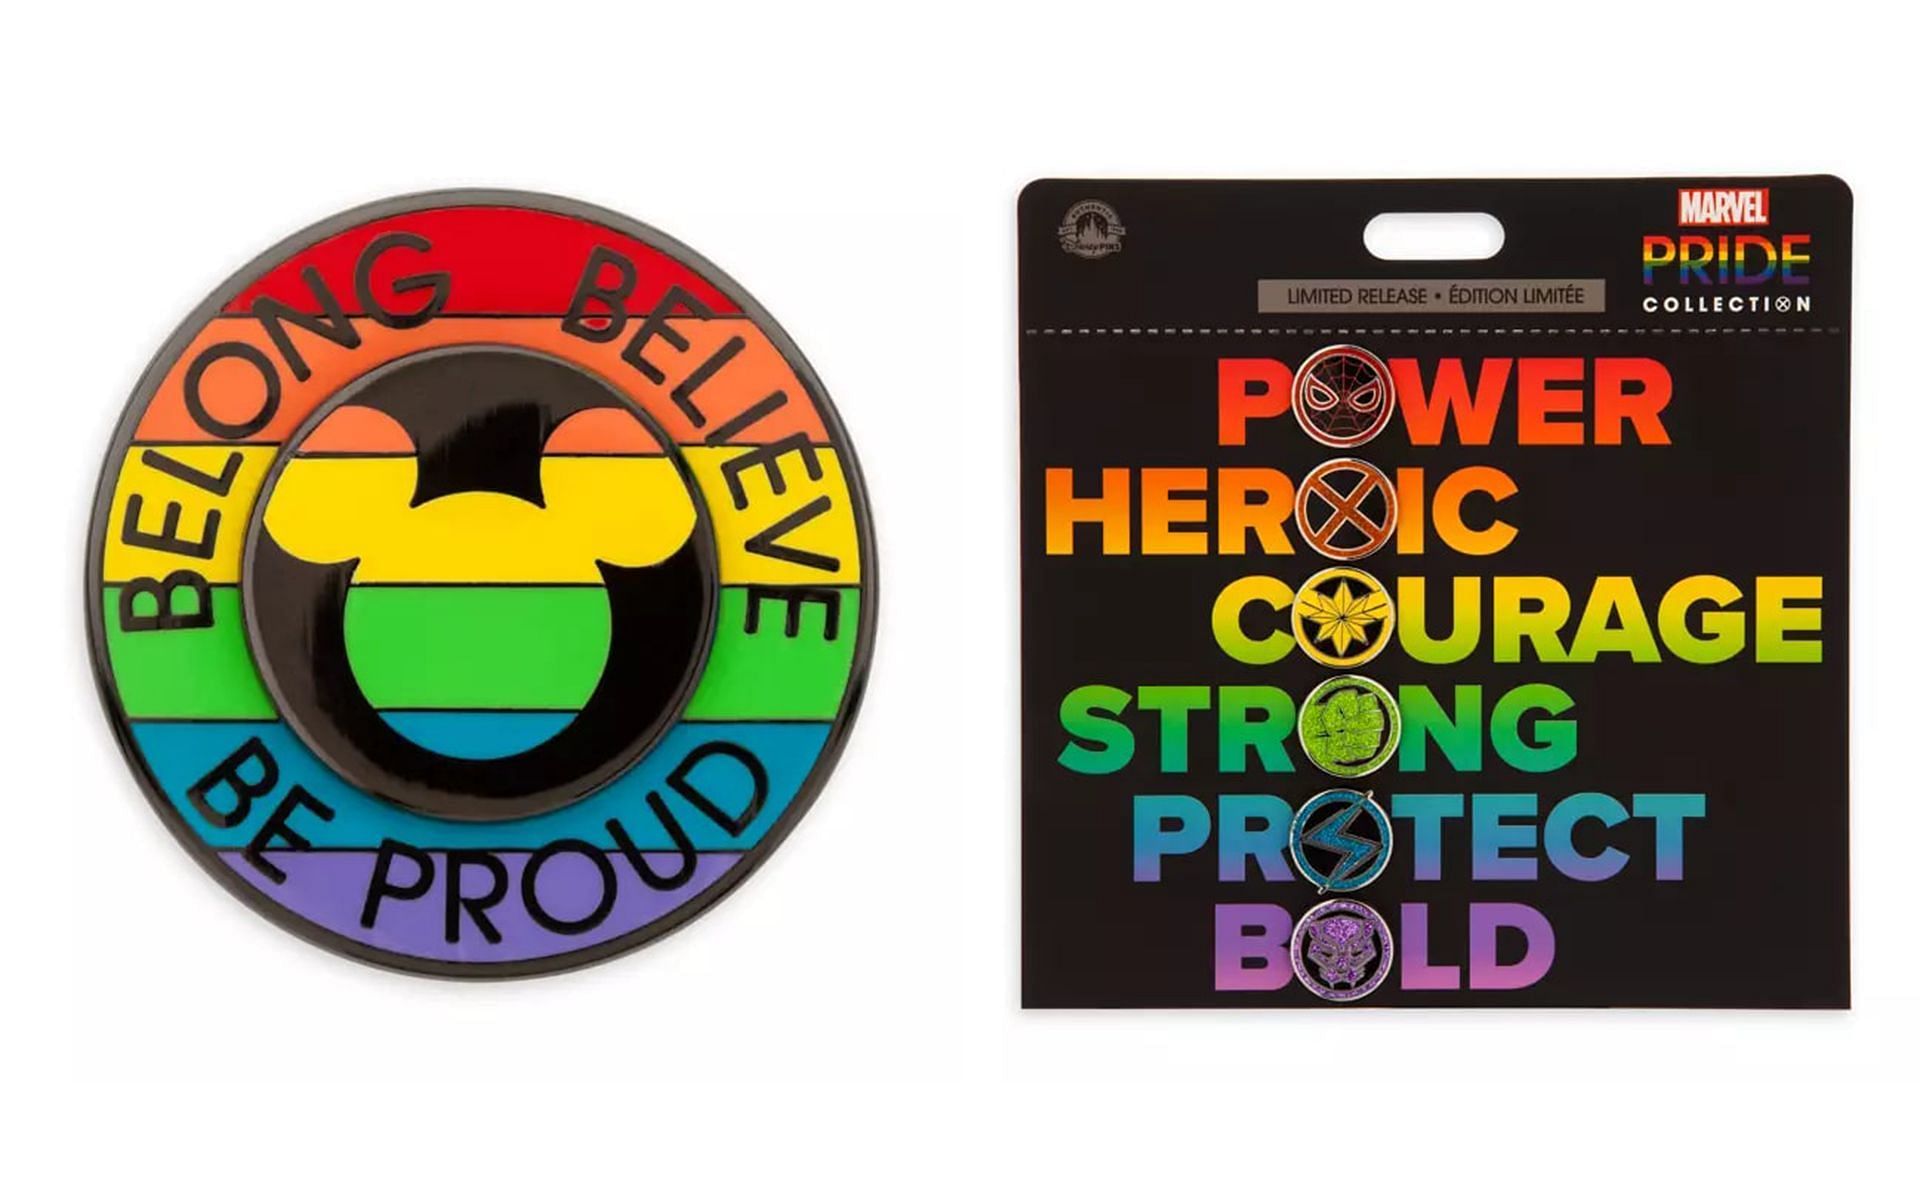 newly released Disney Pride Collection (Image via Disney)